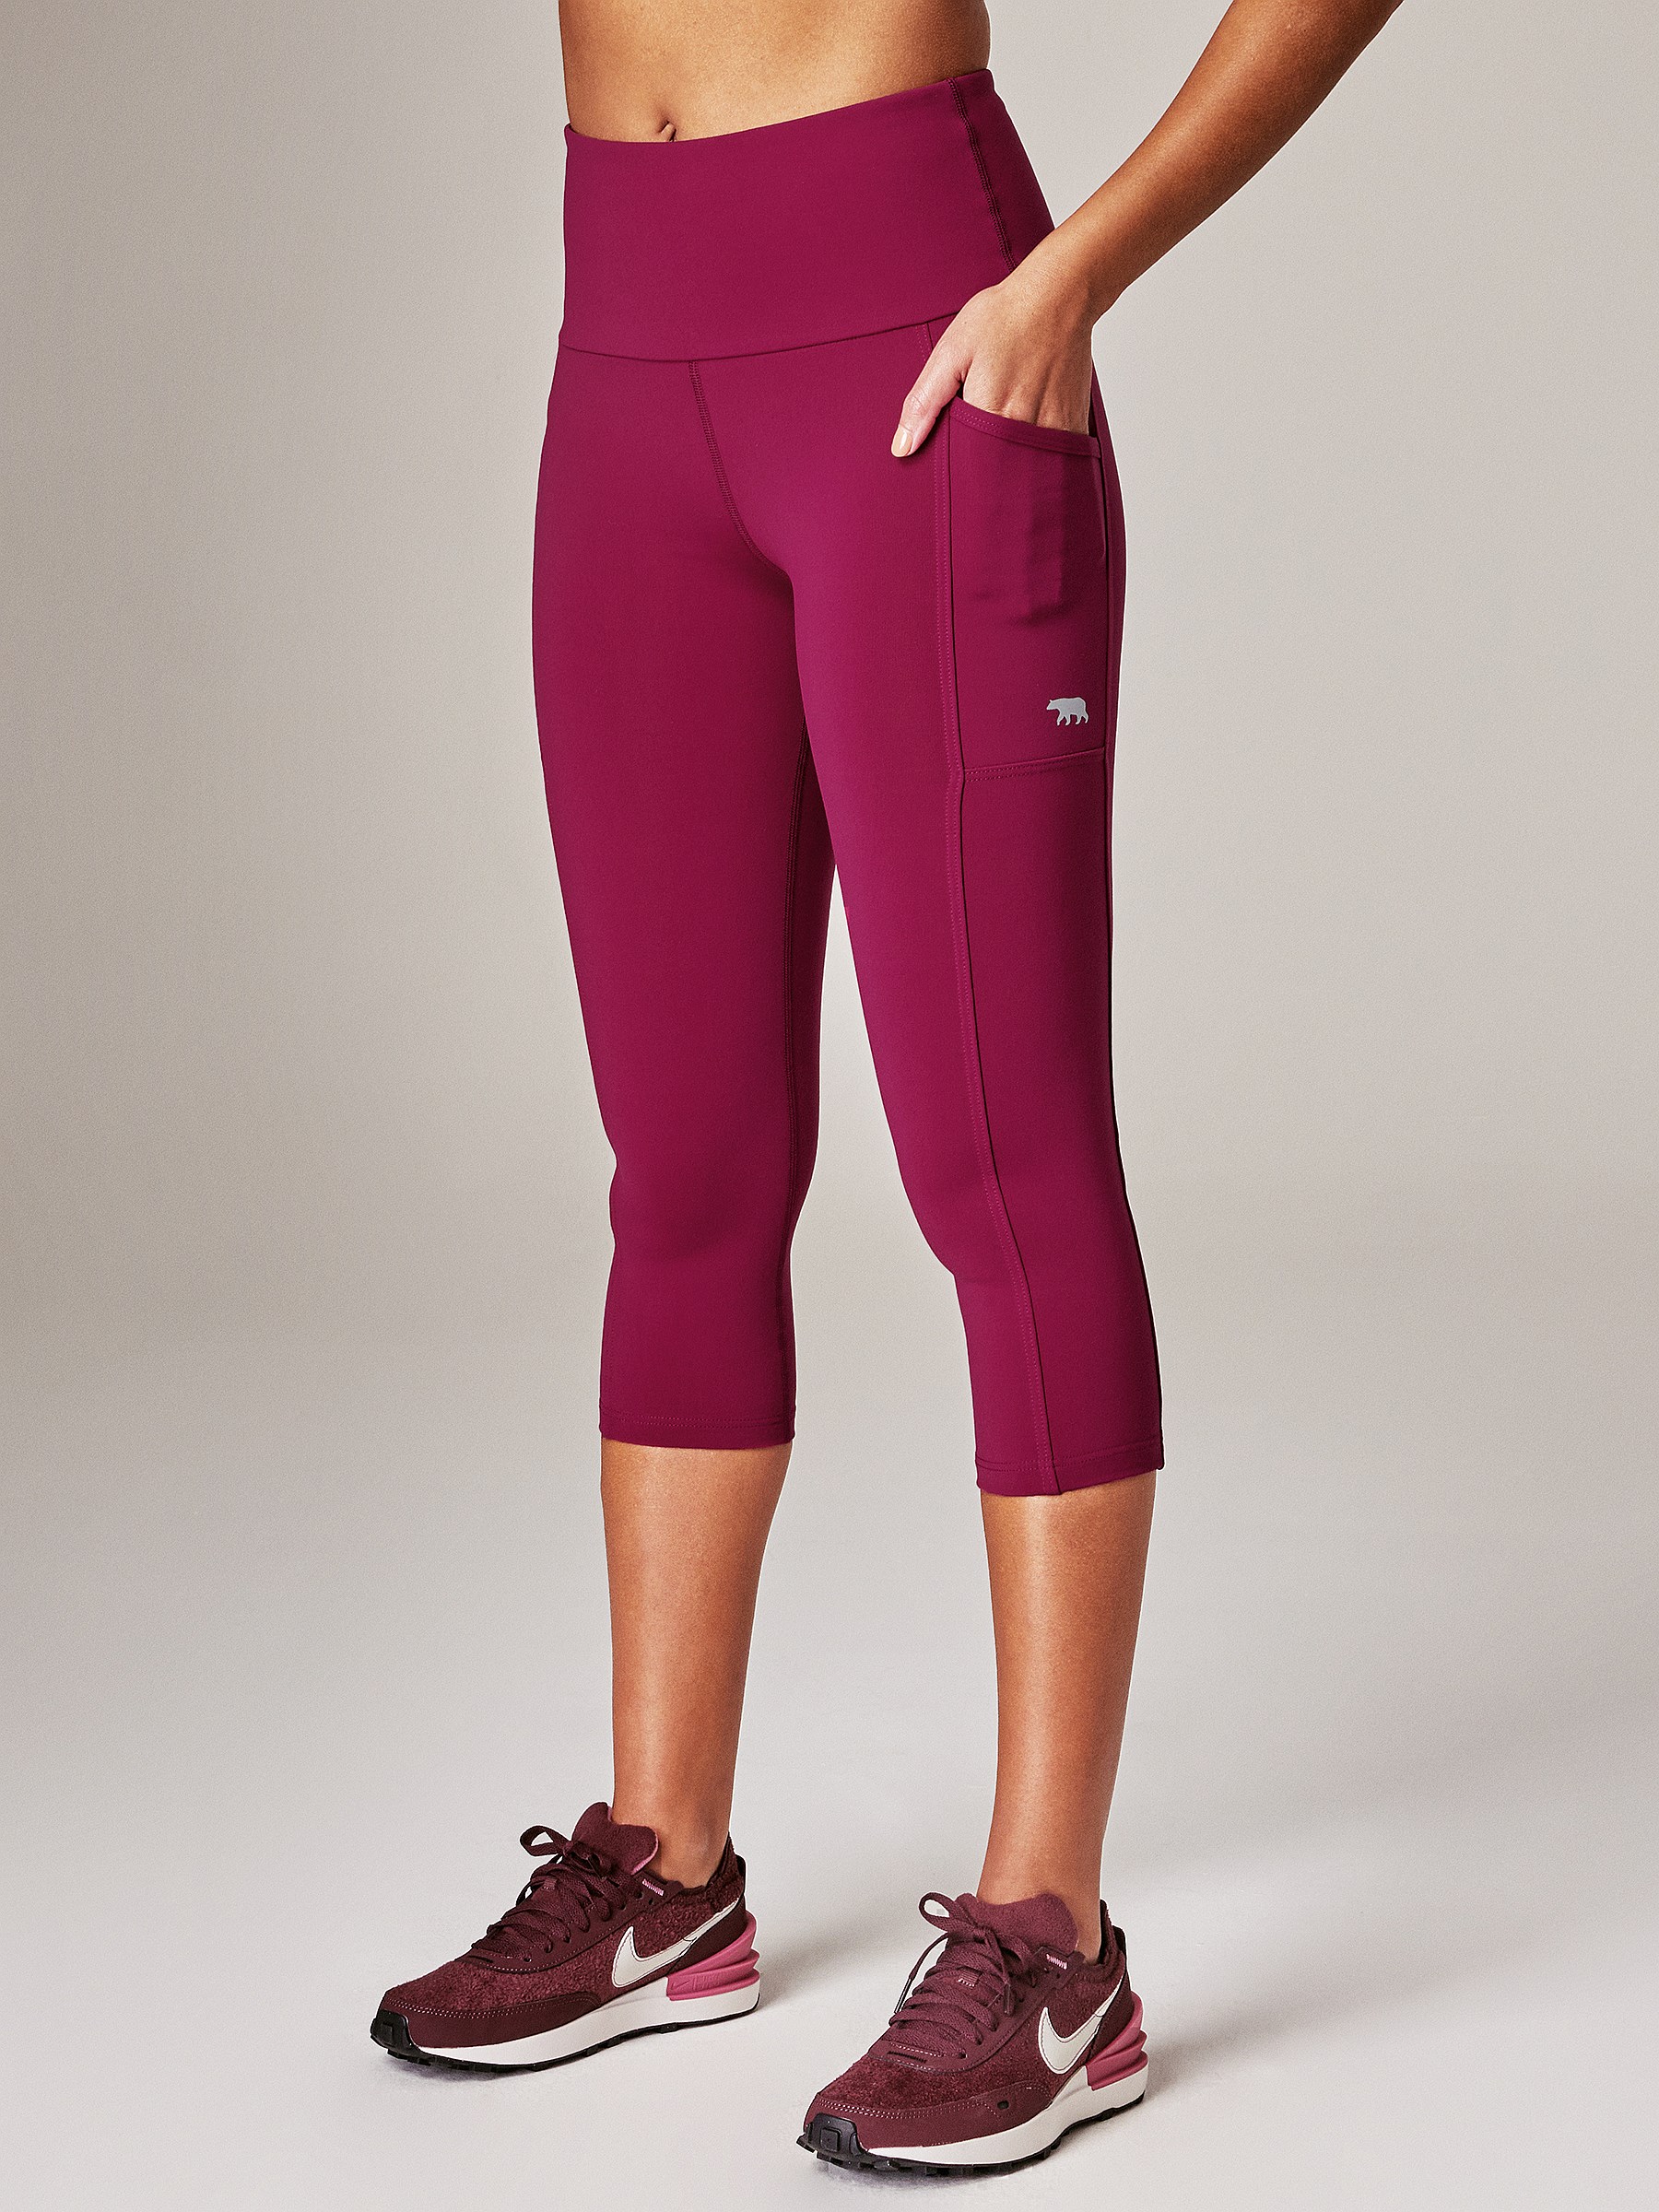 Womens Leggings with Pockets. Running Bare Power Moves 3/4 Tights